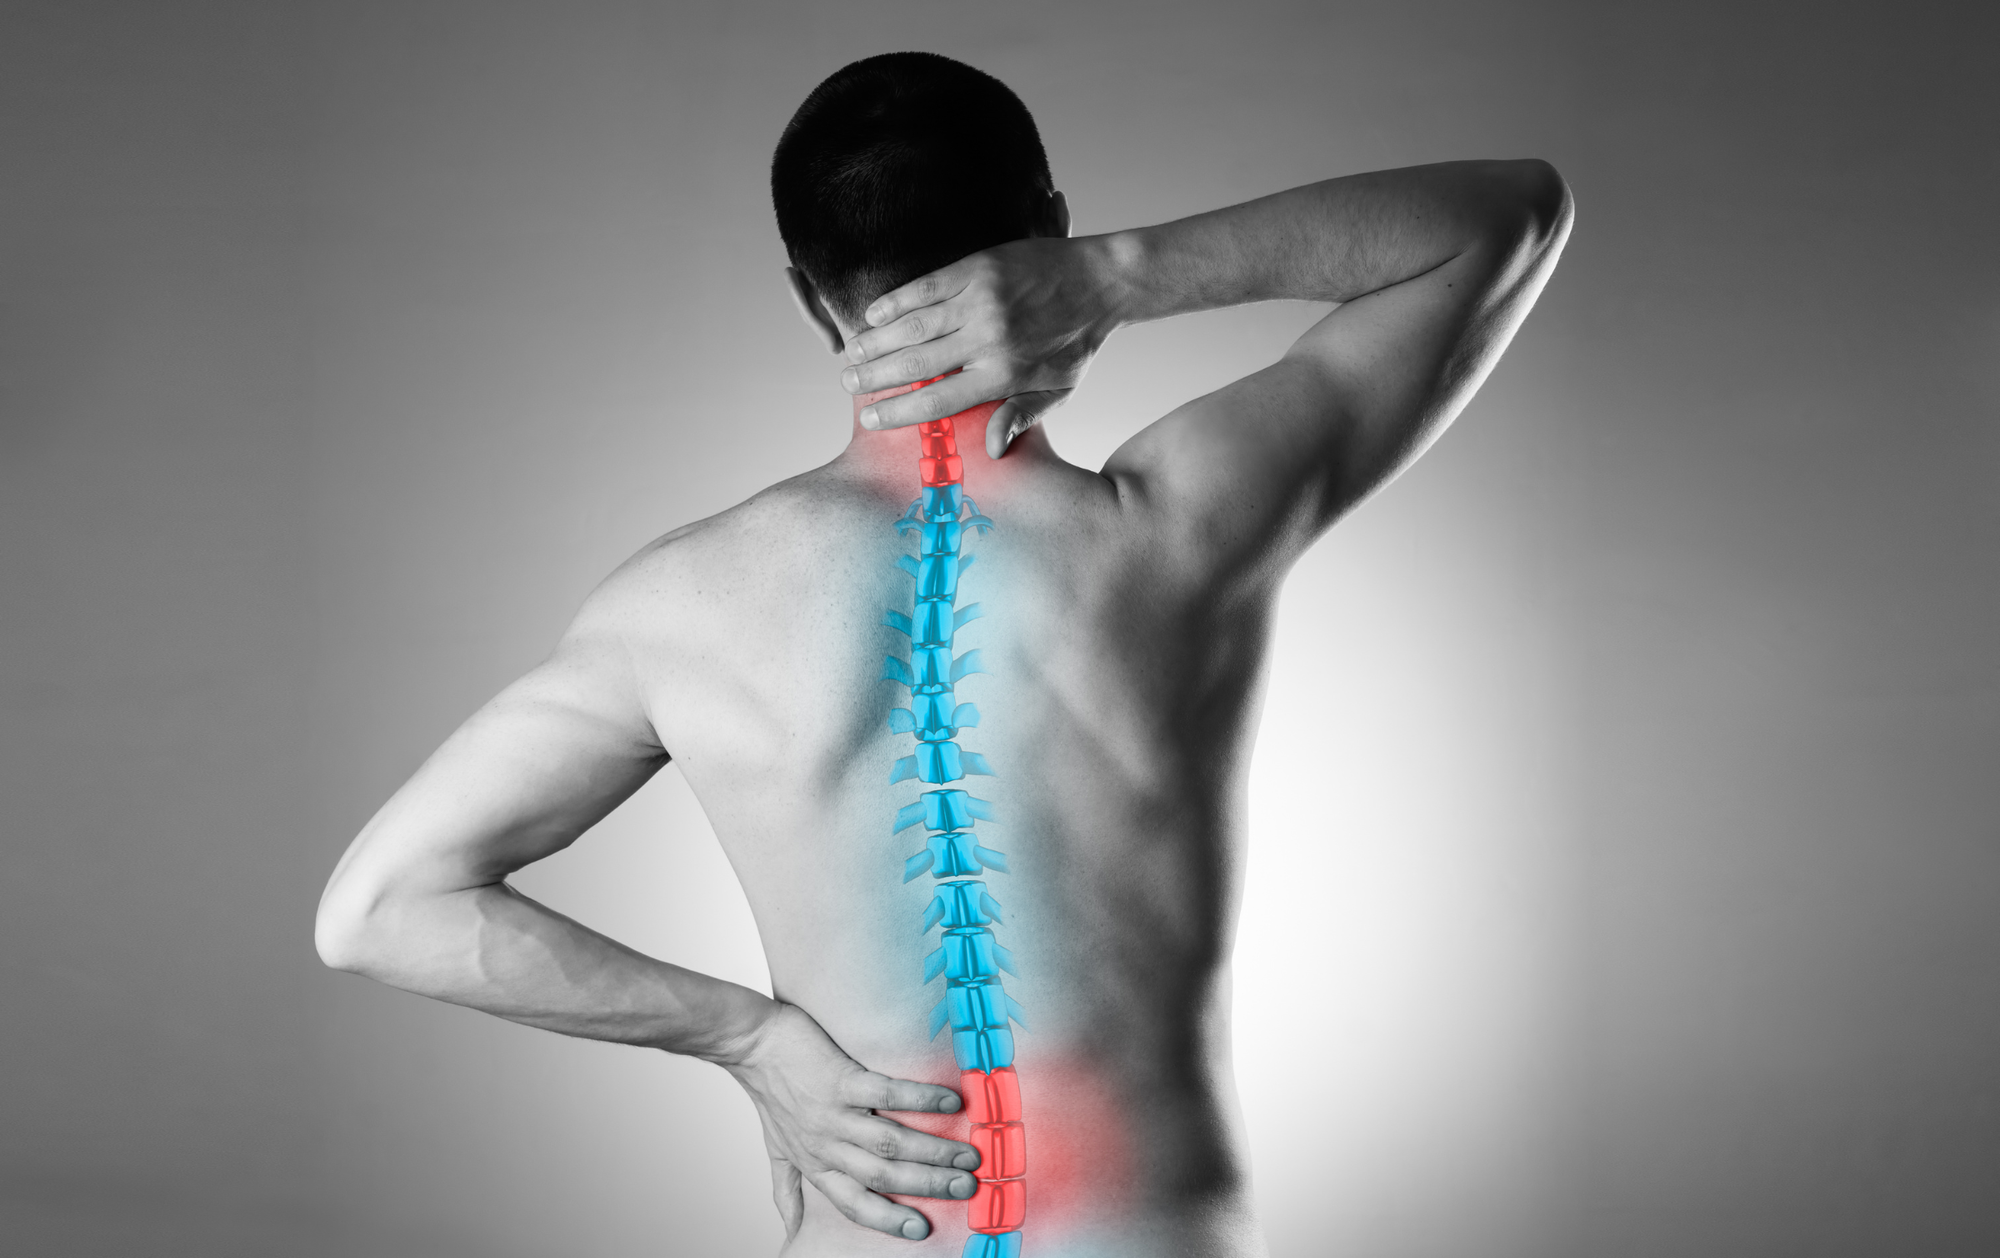 Man with sore back and spinal column superimposed over image.